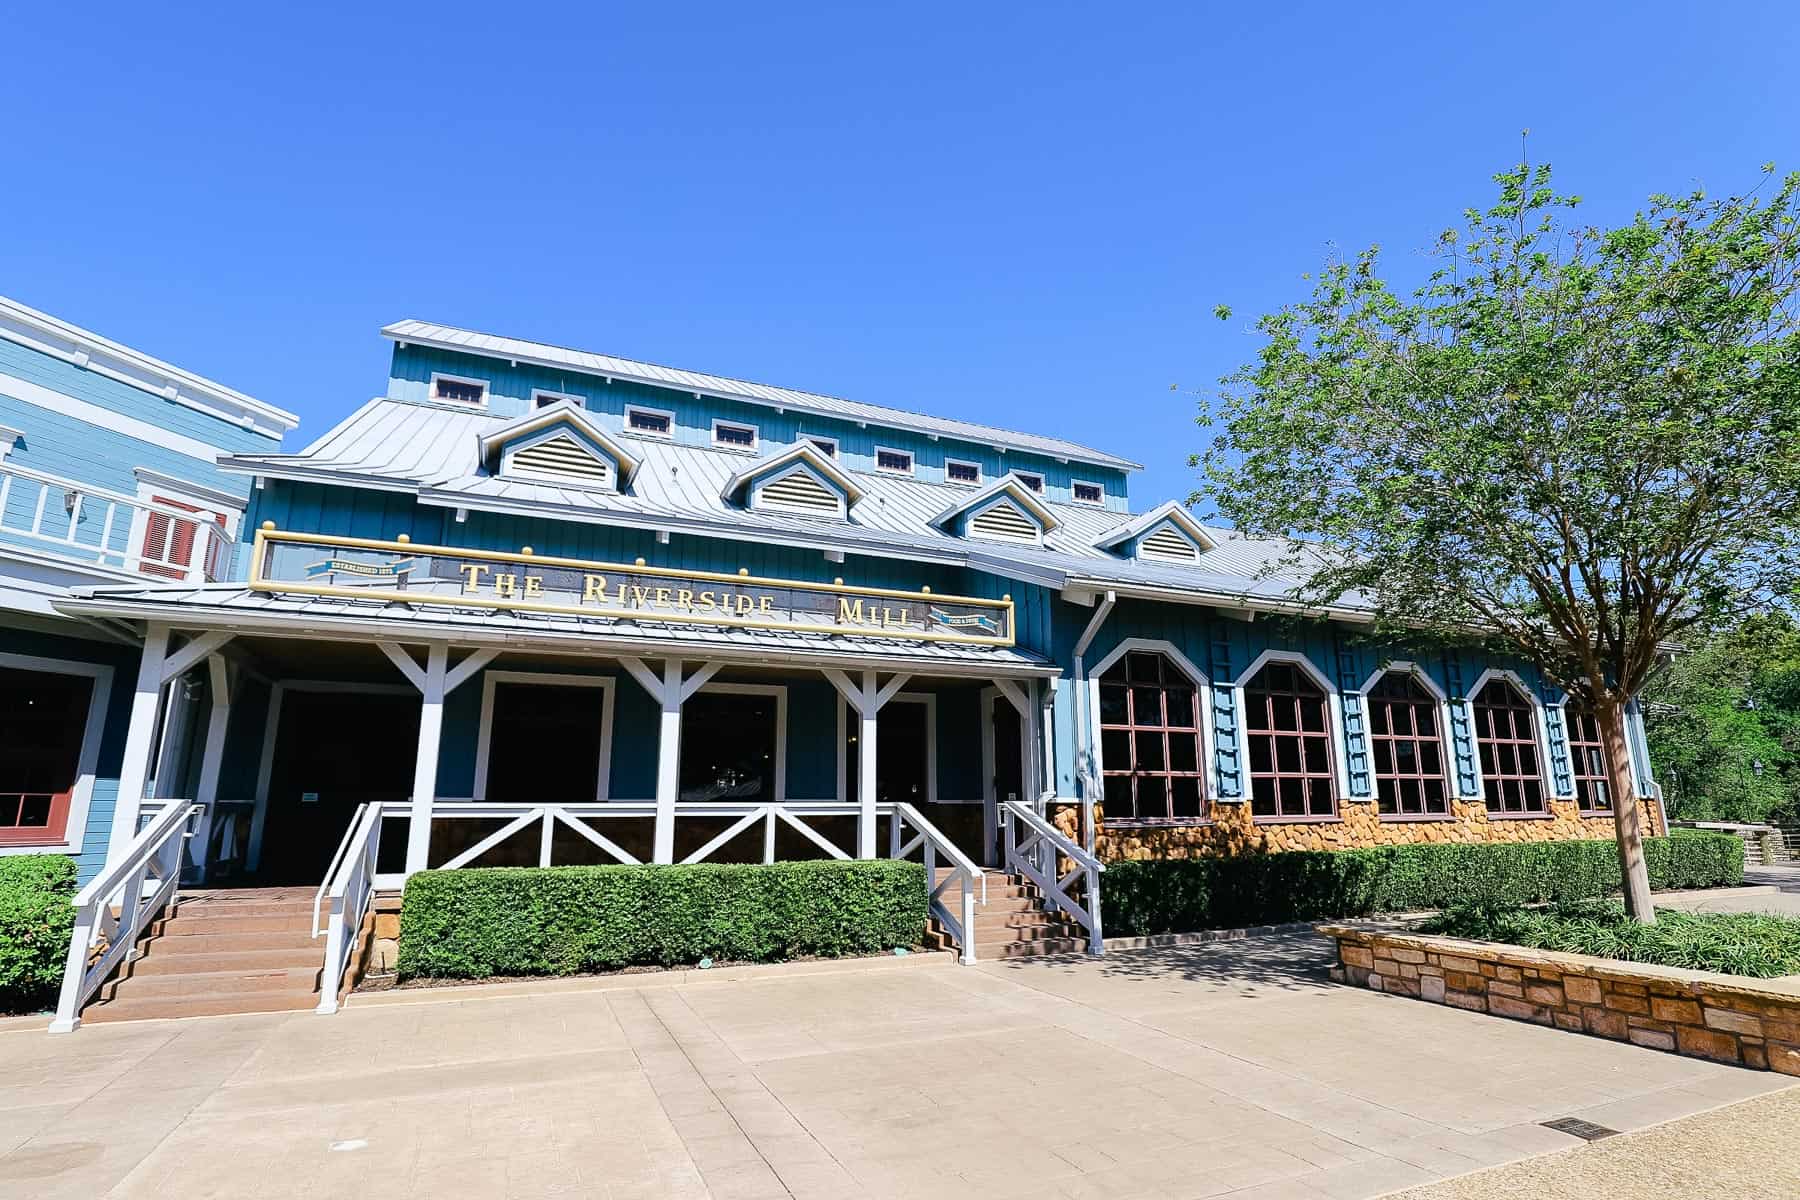 Riverside Mill Review (The Food Court at Disney’s Port Orleans Riverside)